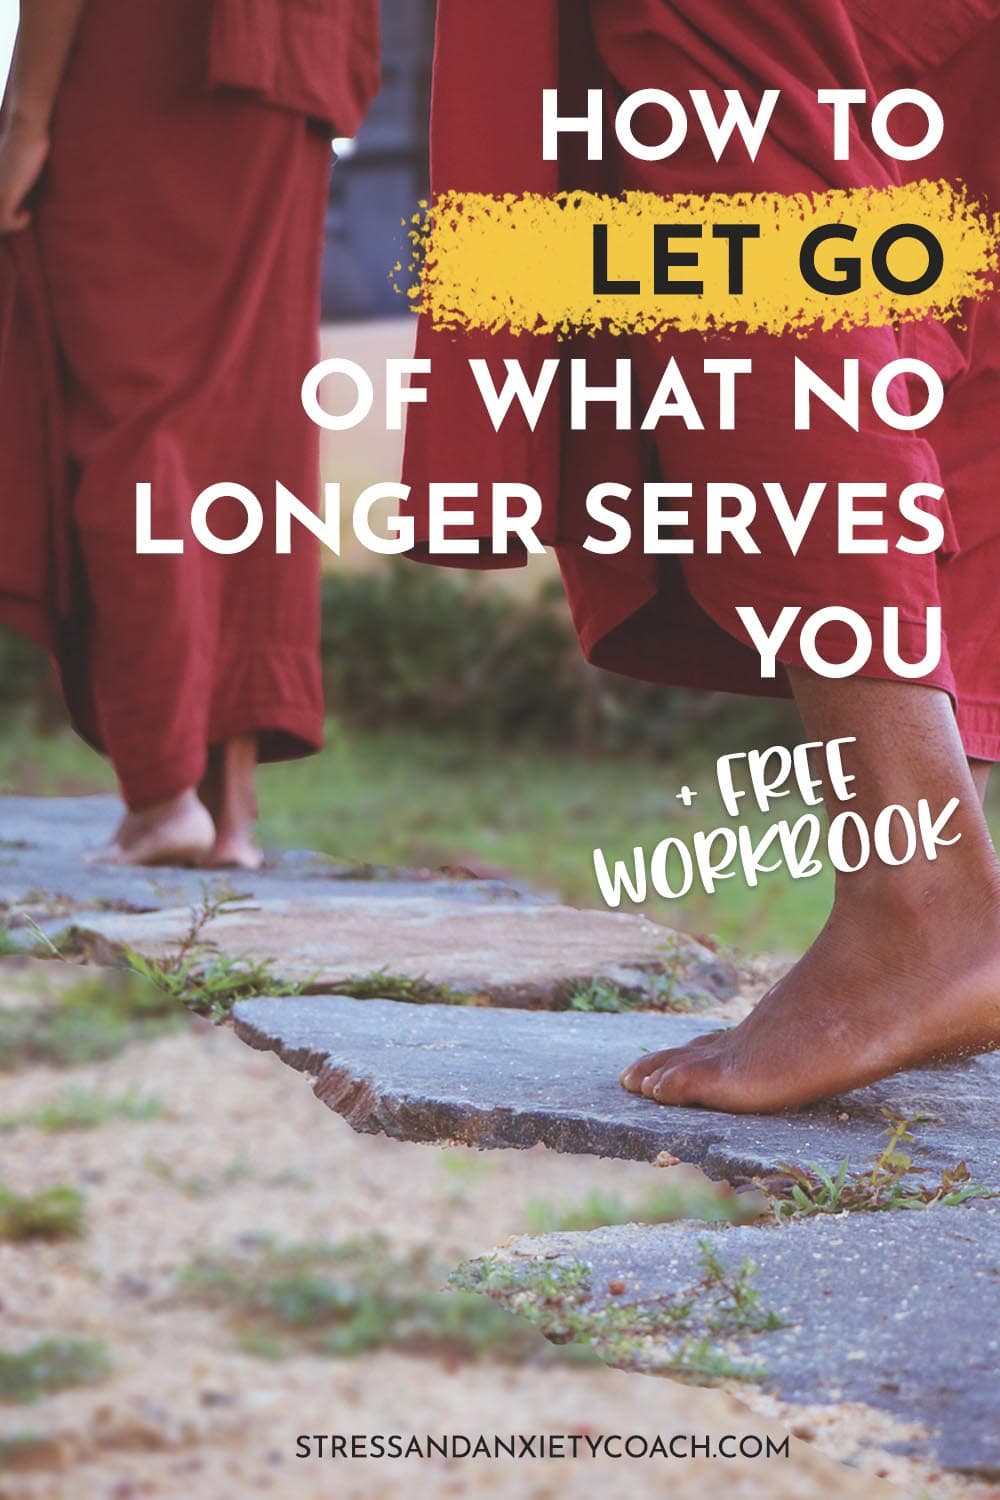 How to Let Go free workbook